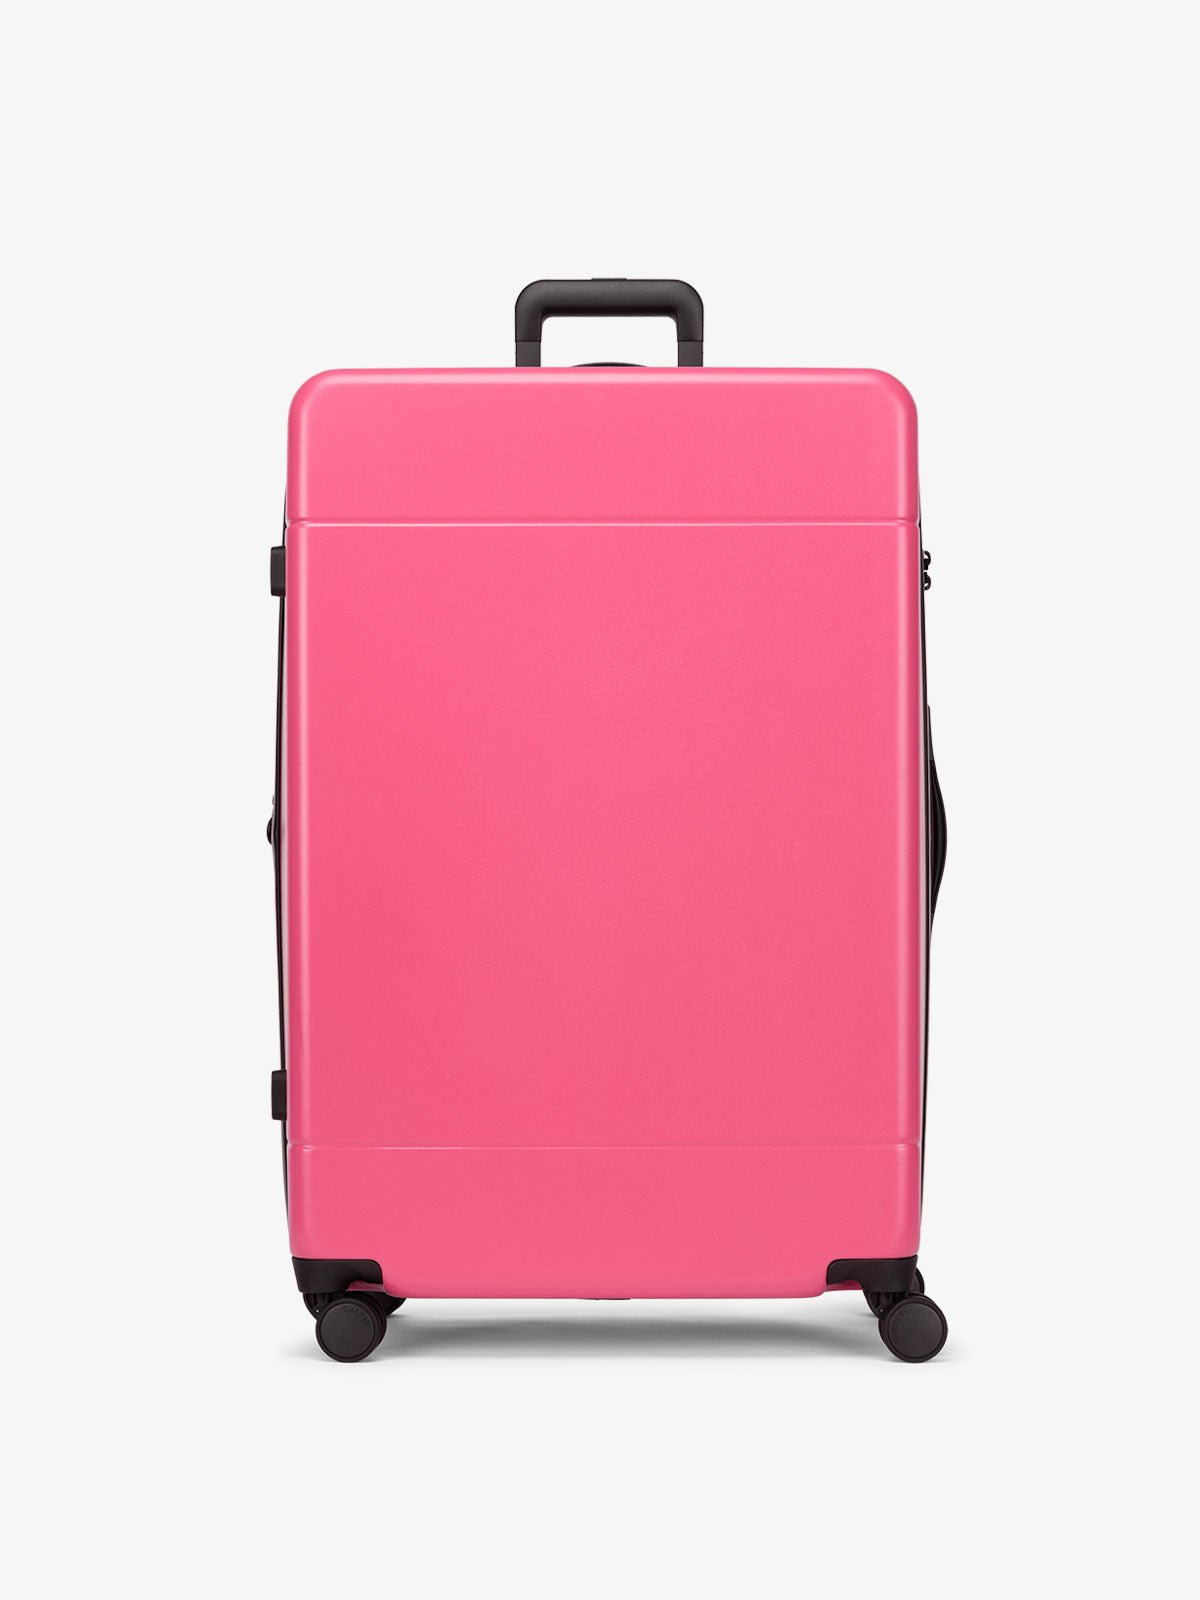 large 30 inch hard shell luggage in pink dragonfruit